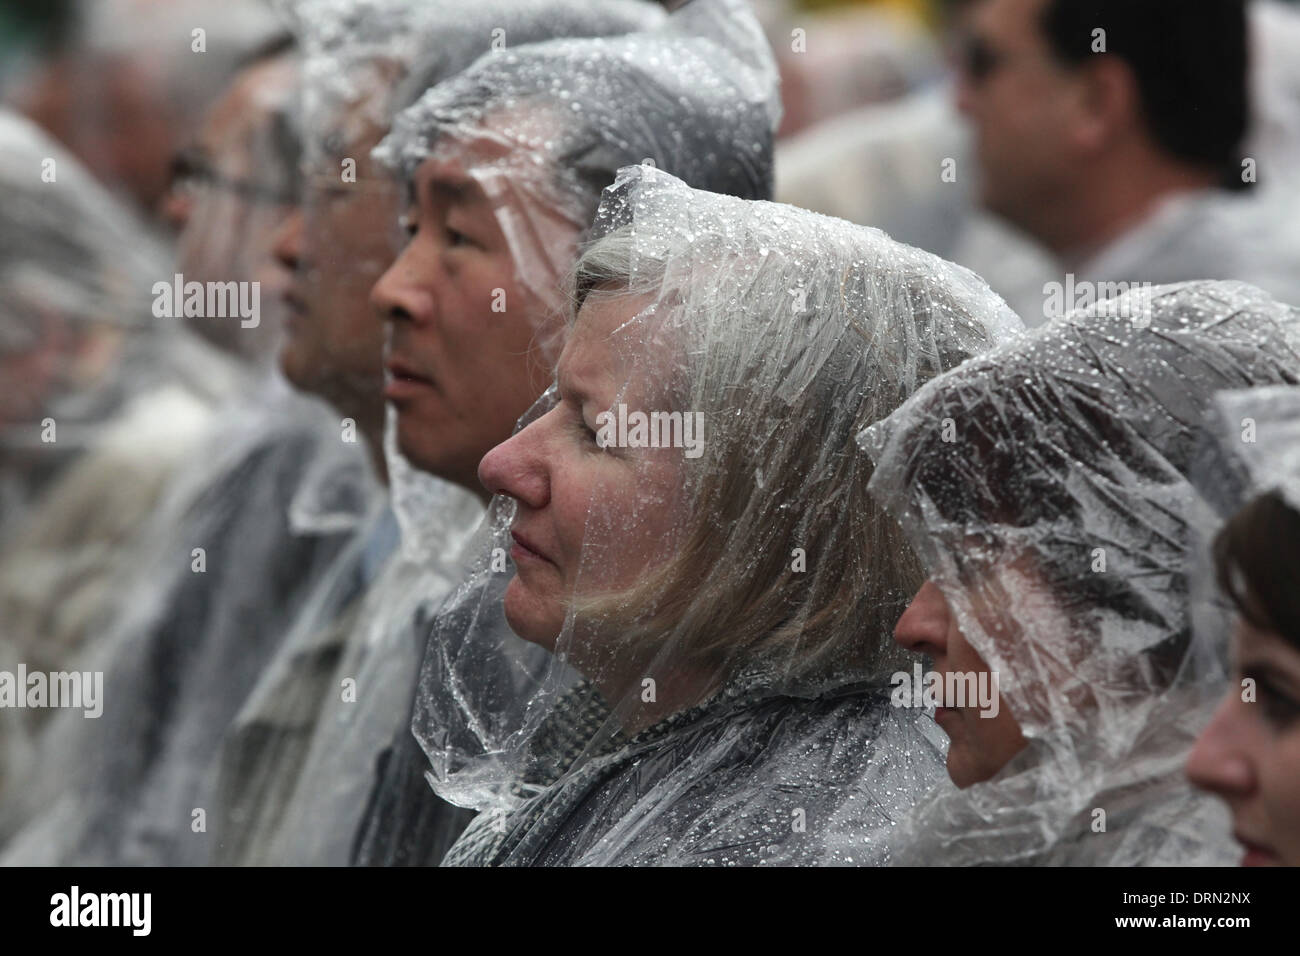 Foreigner diplomats wearing raincoats attend an orthodox service in honour of Saints Cyril and Methodius in Mikulcice. Stock Photo